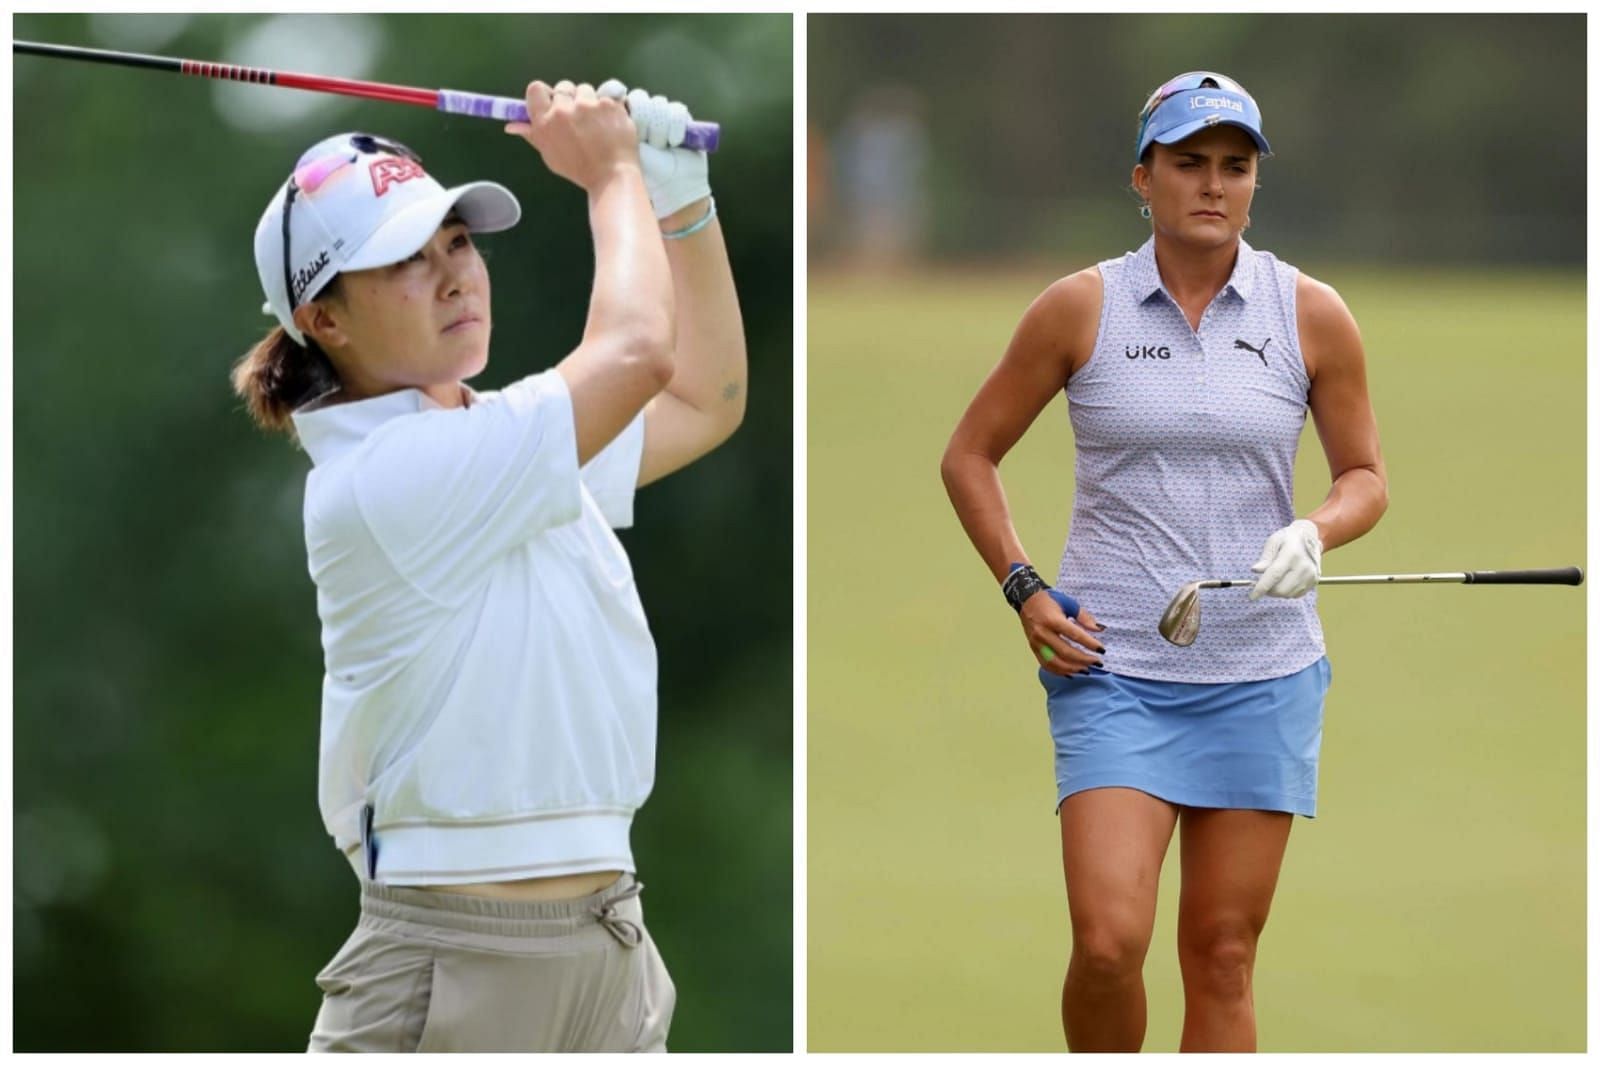 Danielle Kang and Lexi Thompson missed the cut at the Chevron Championship